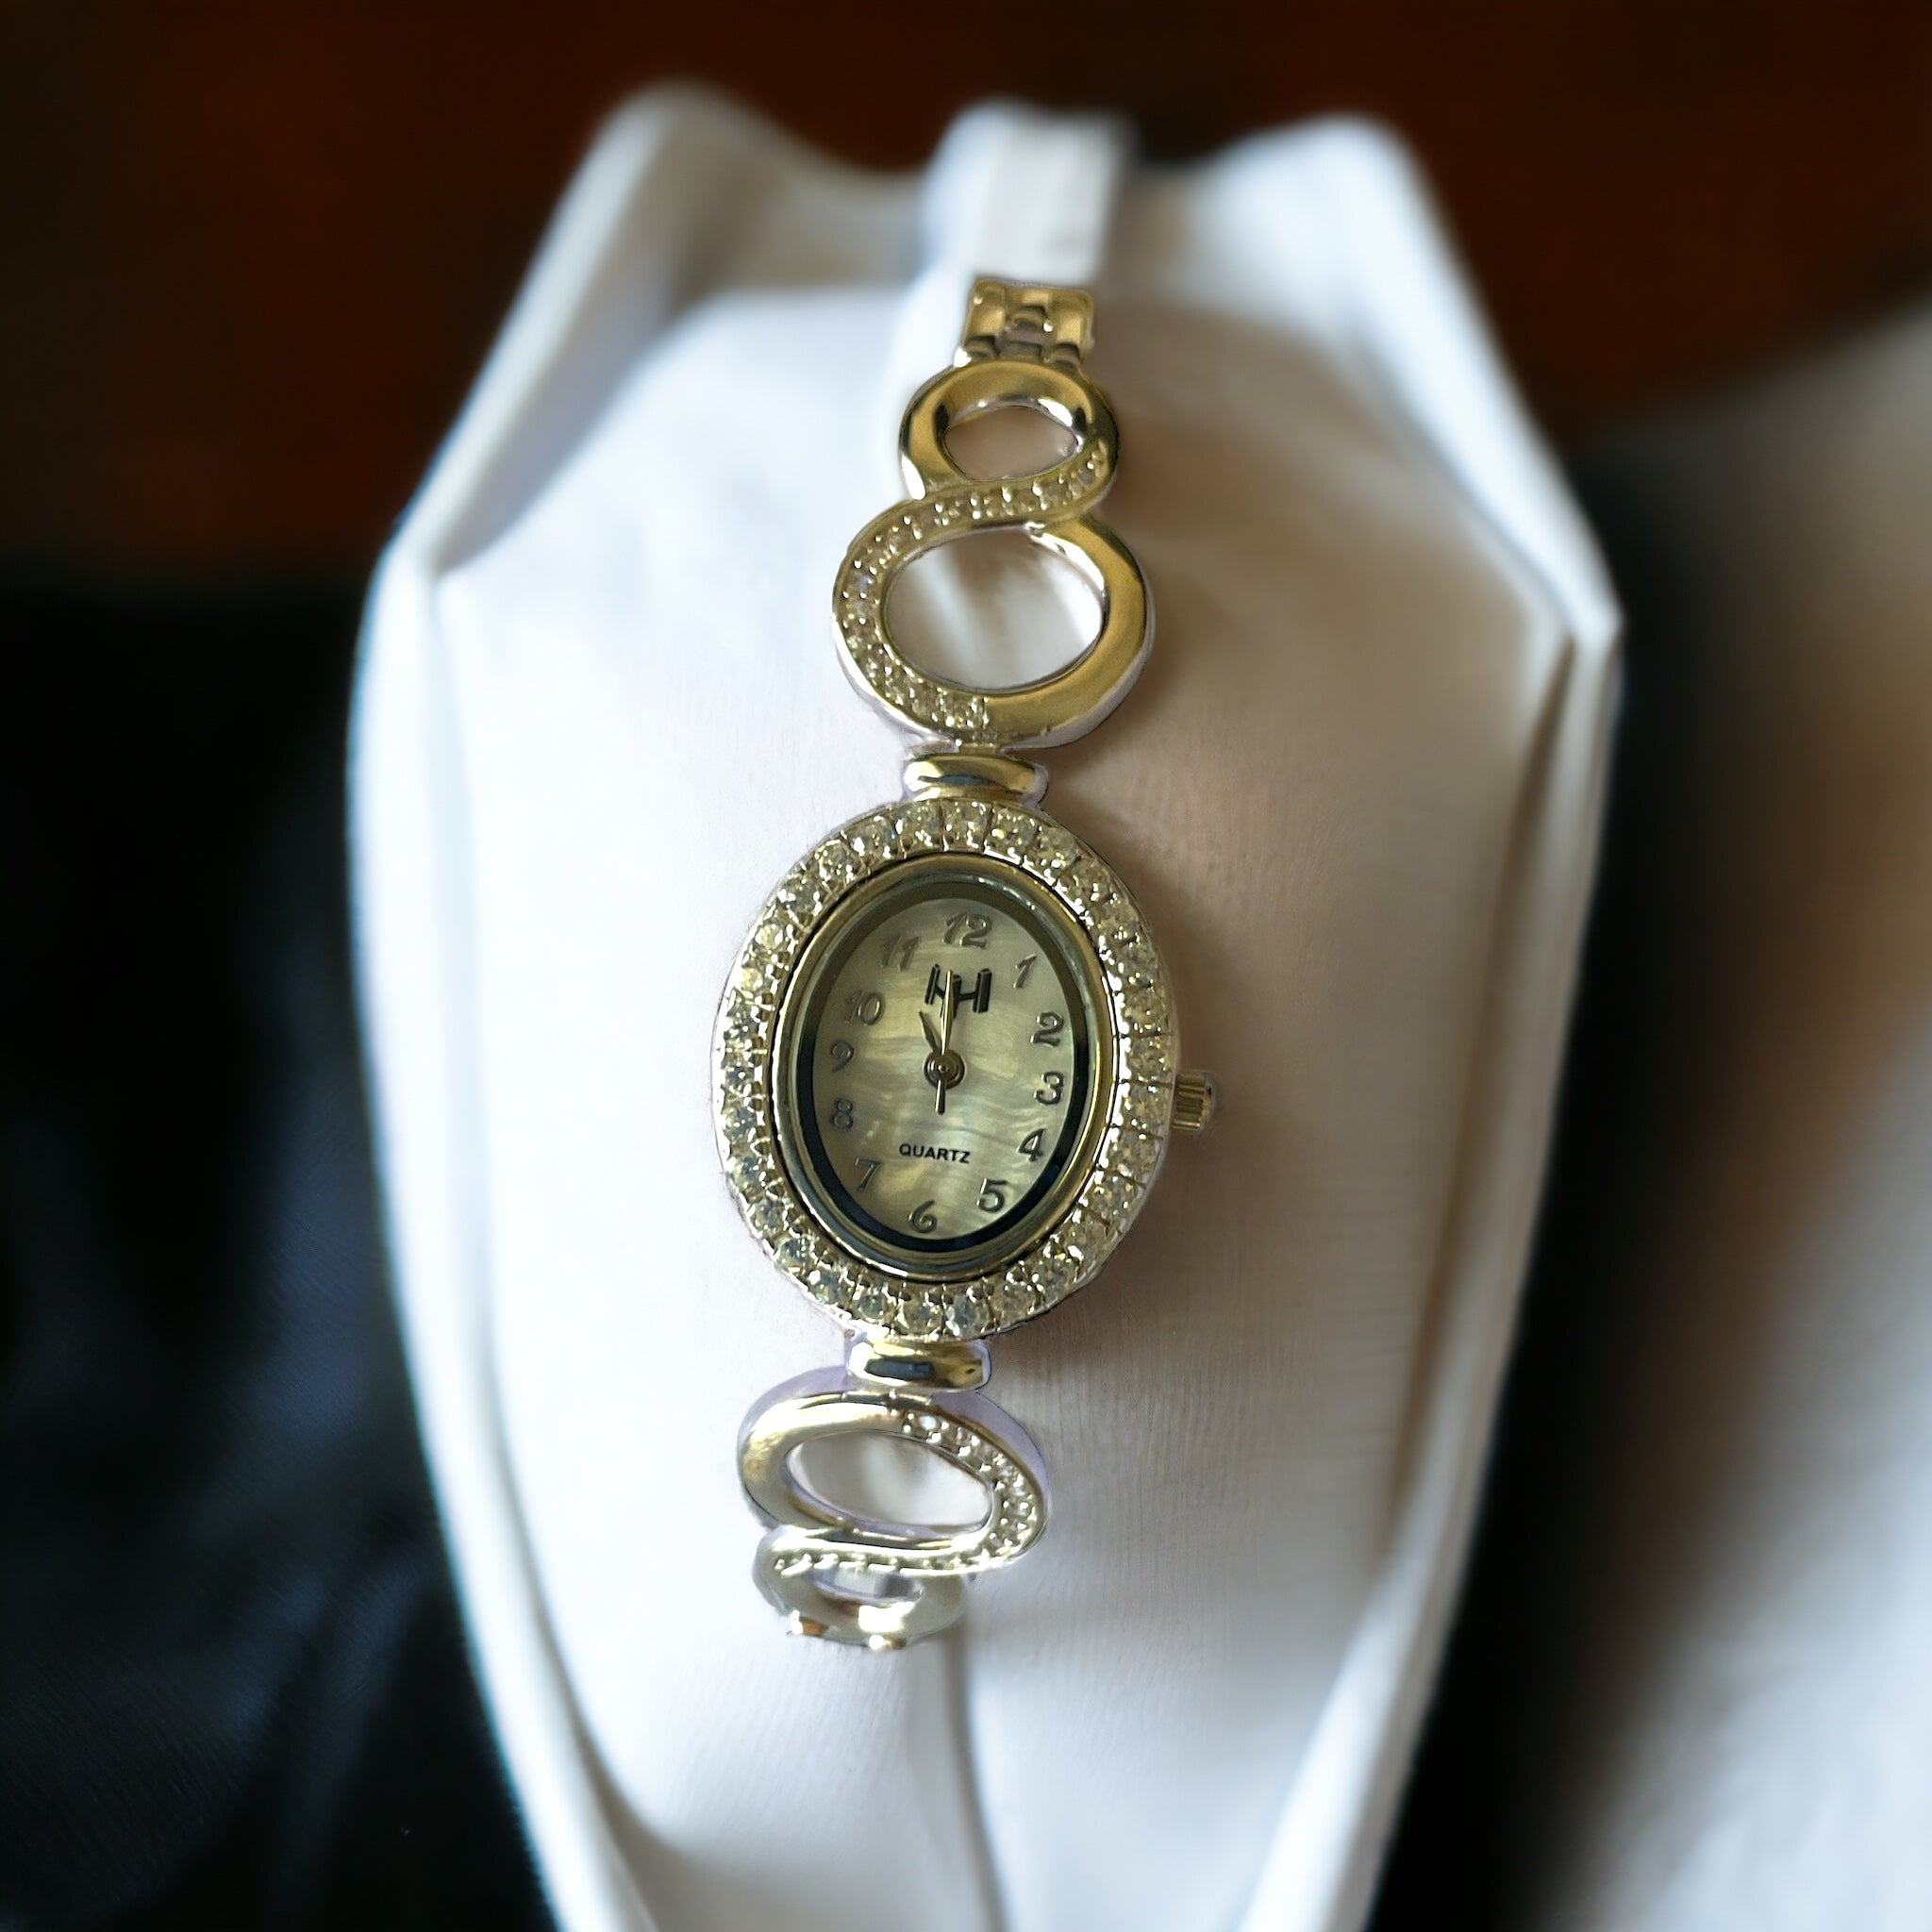 a close up of a watch on a tie